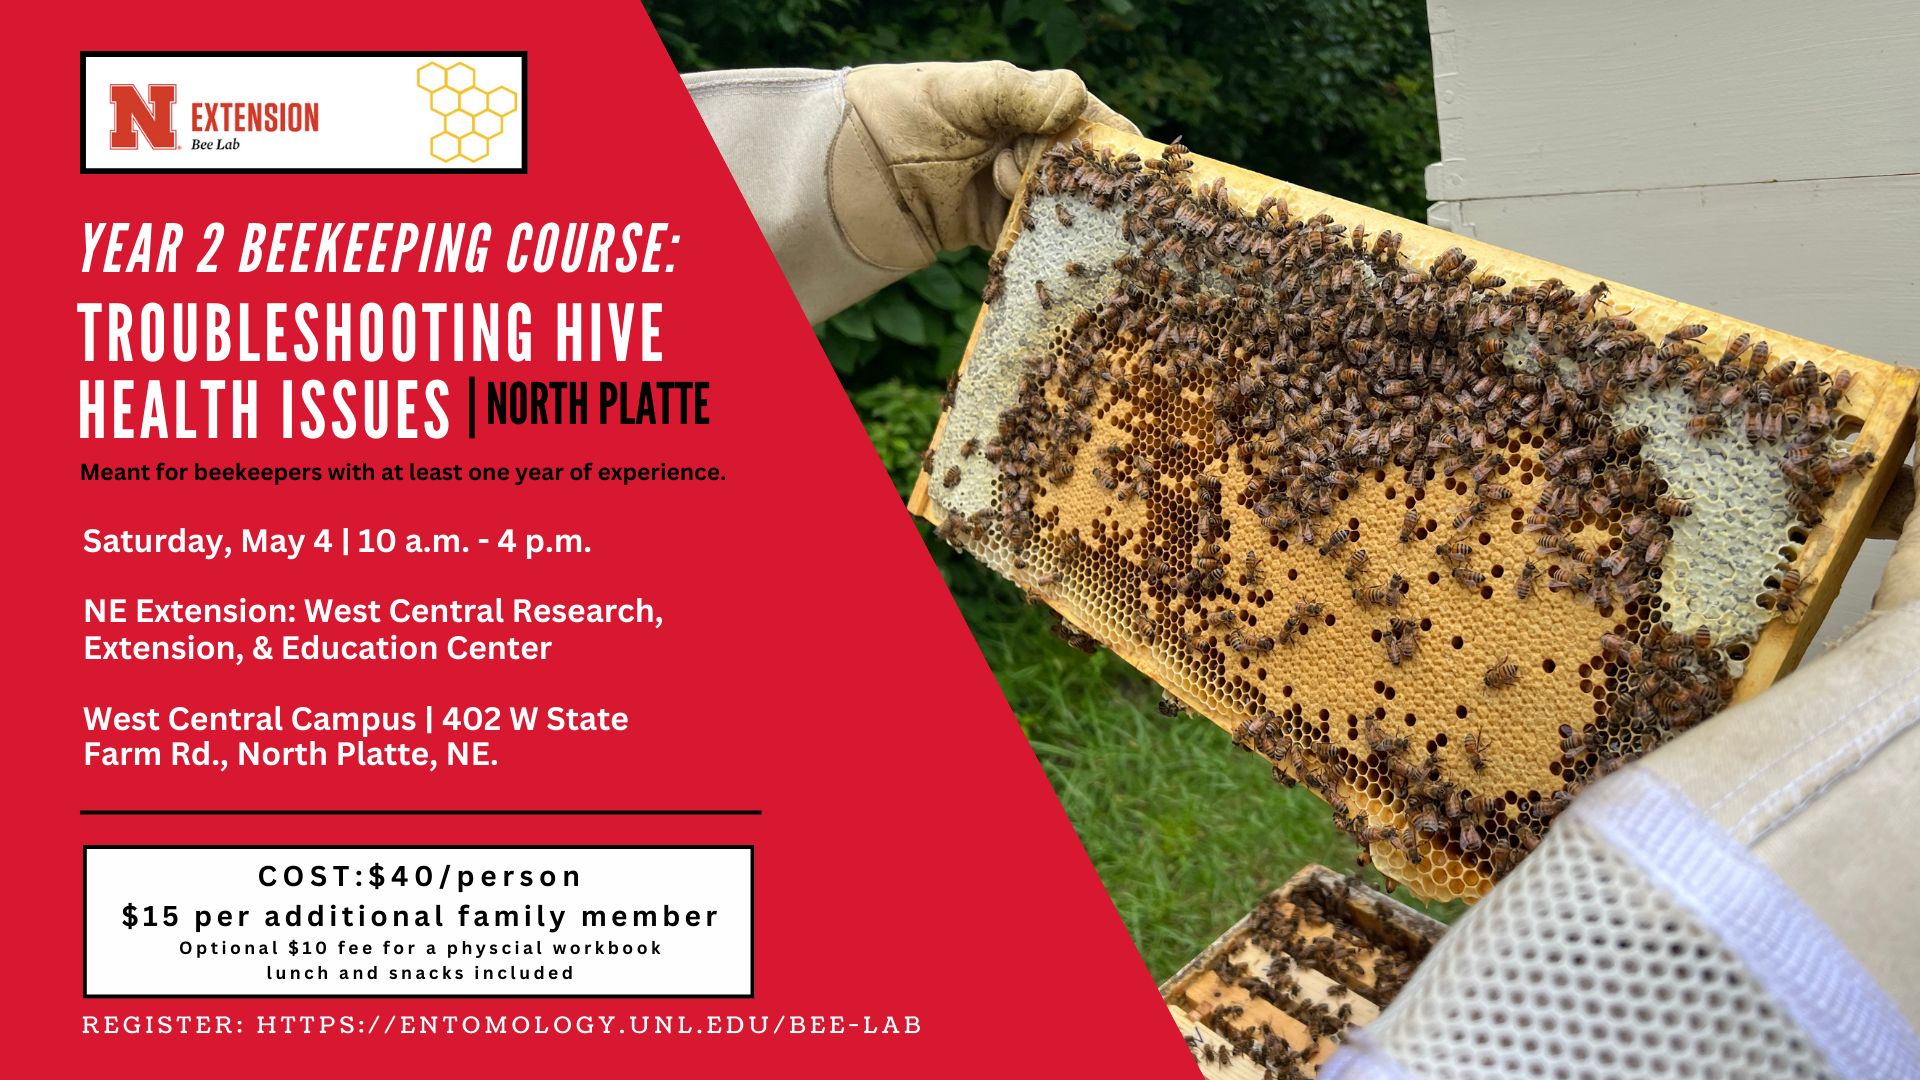 Year 2 Beekeeping Course: Troubleshooting Hive health issues at North Platte